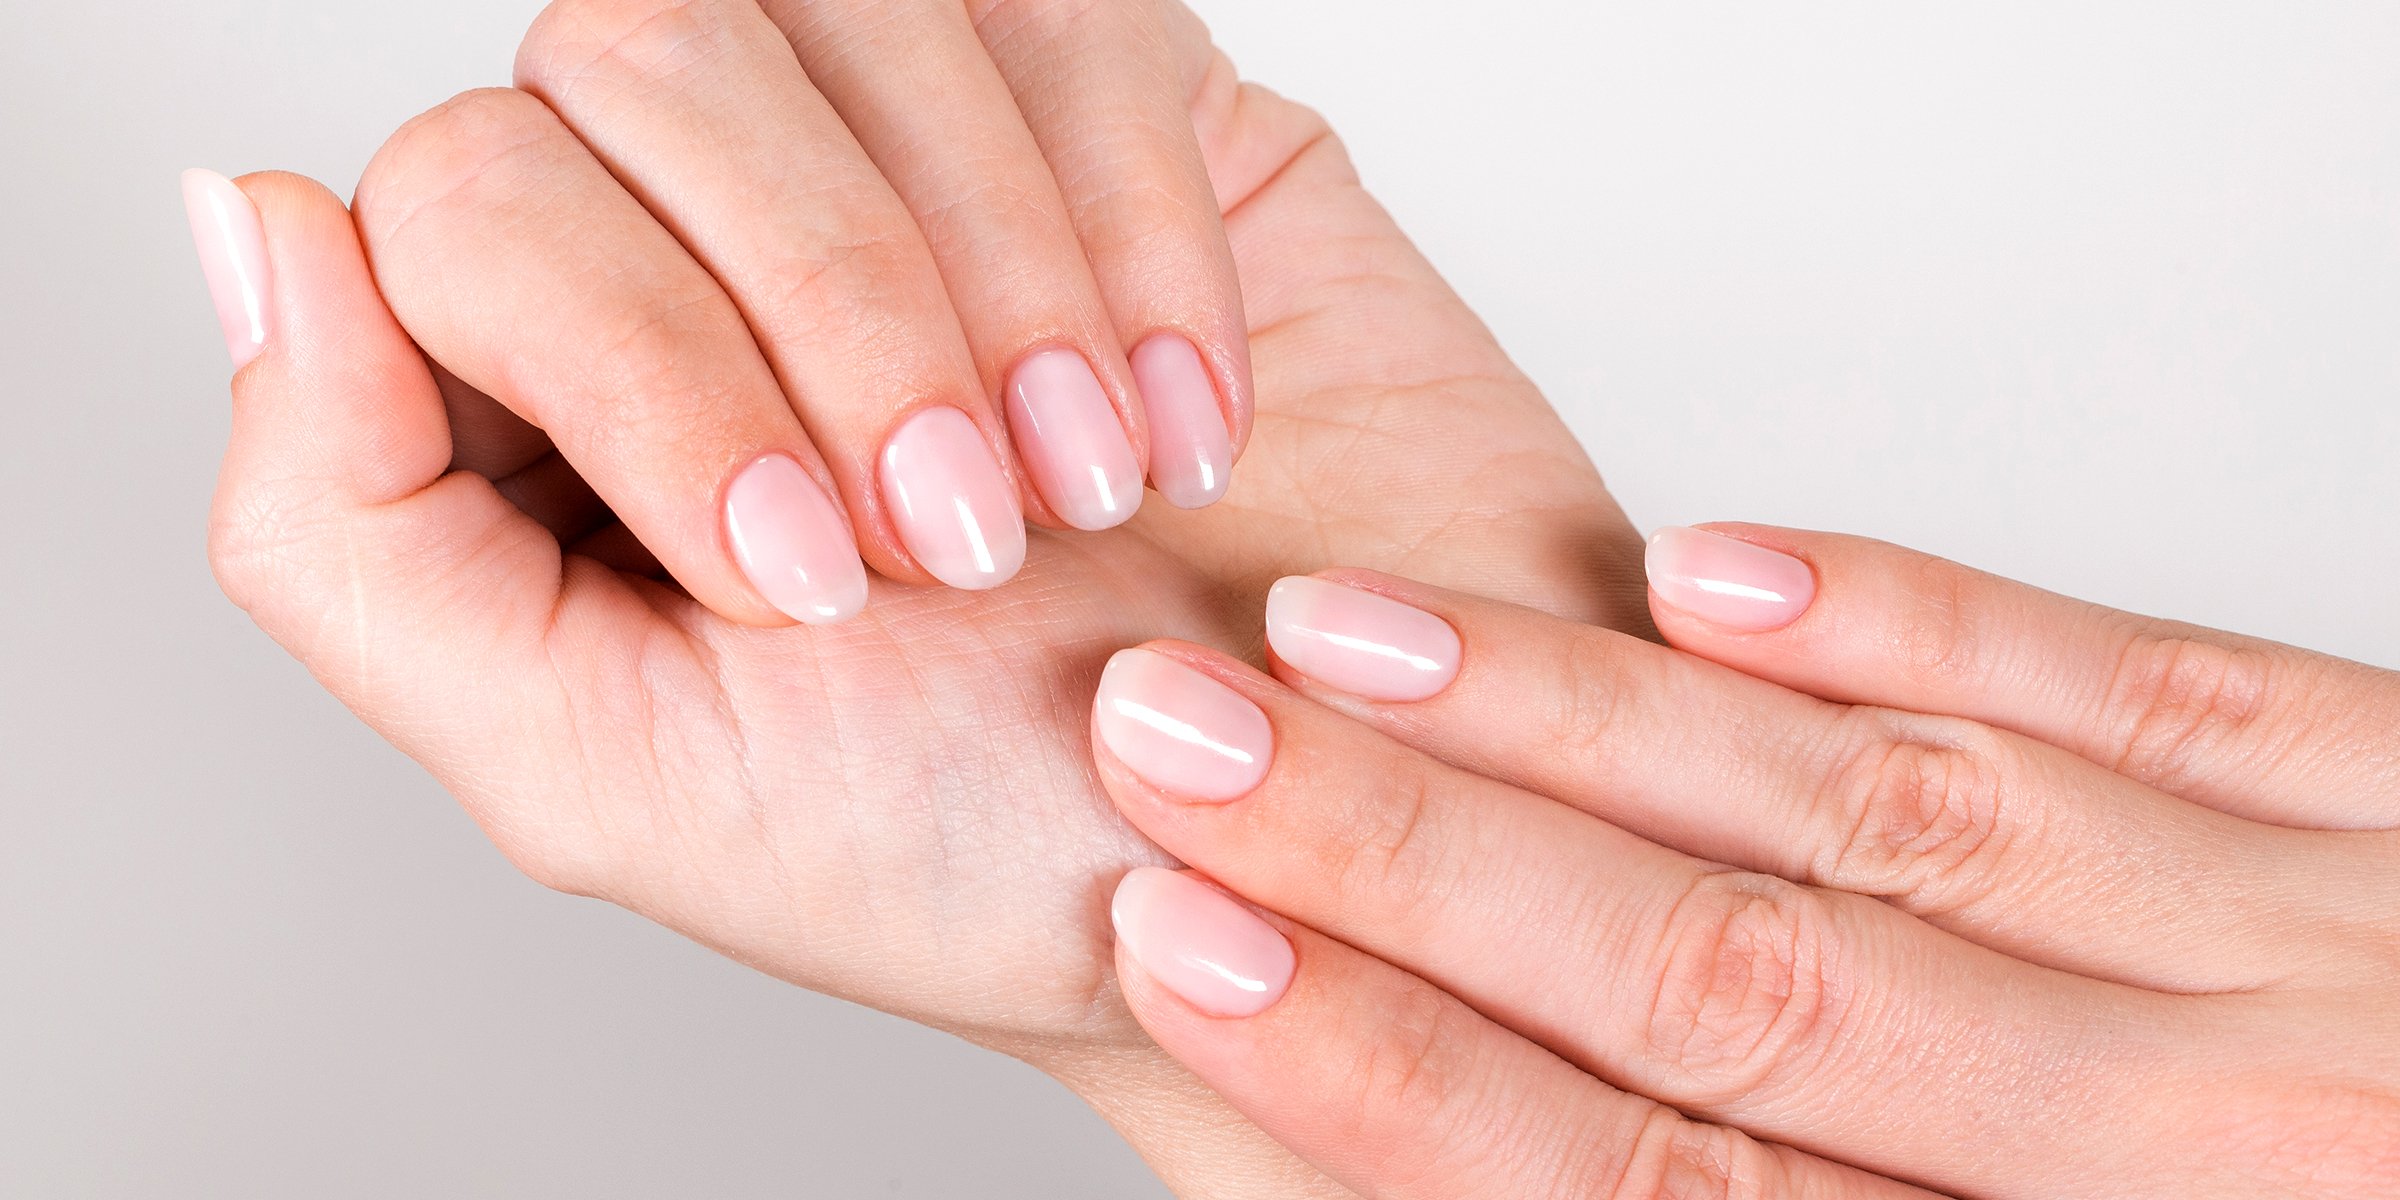 A woman's natural-looking nails. | Soure: Shutterstock